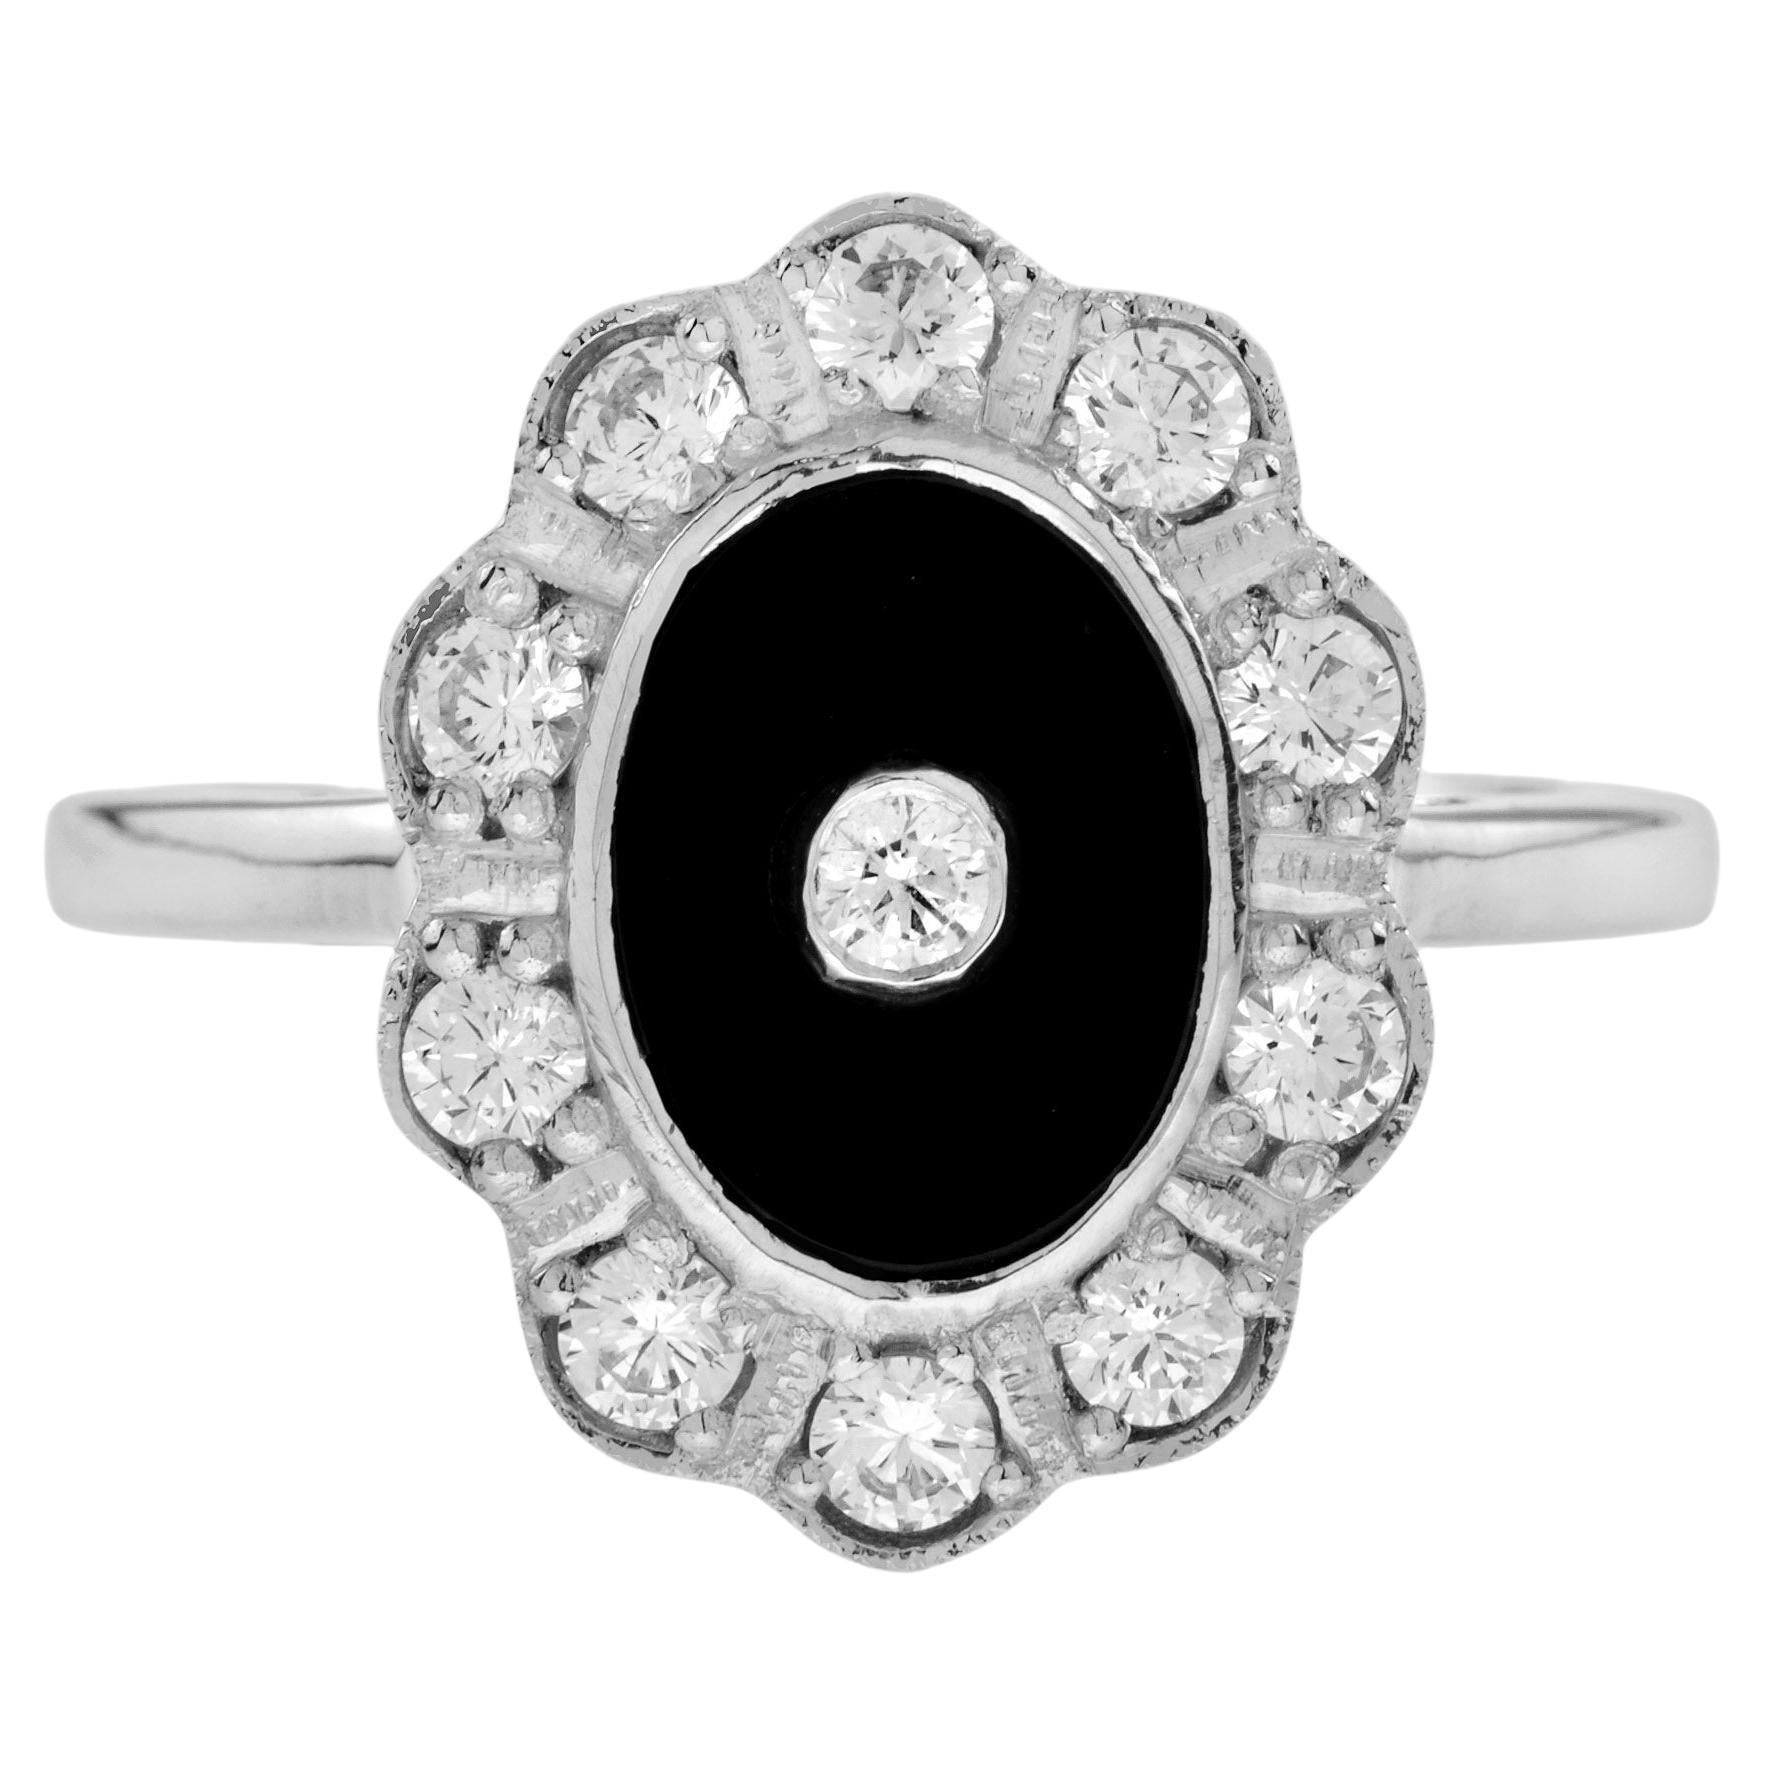 Diamond and Onyx Art Deco Style Halo Ring in 14K White Gold